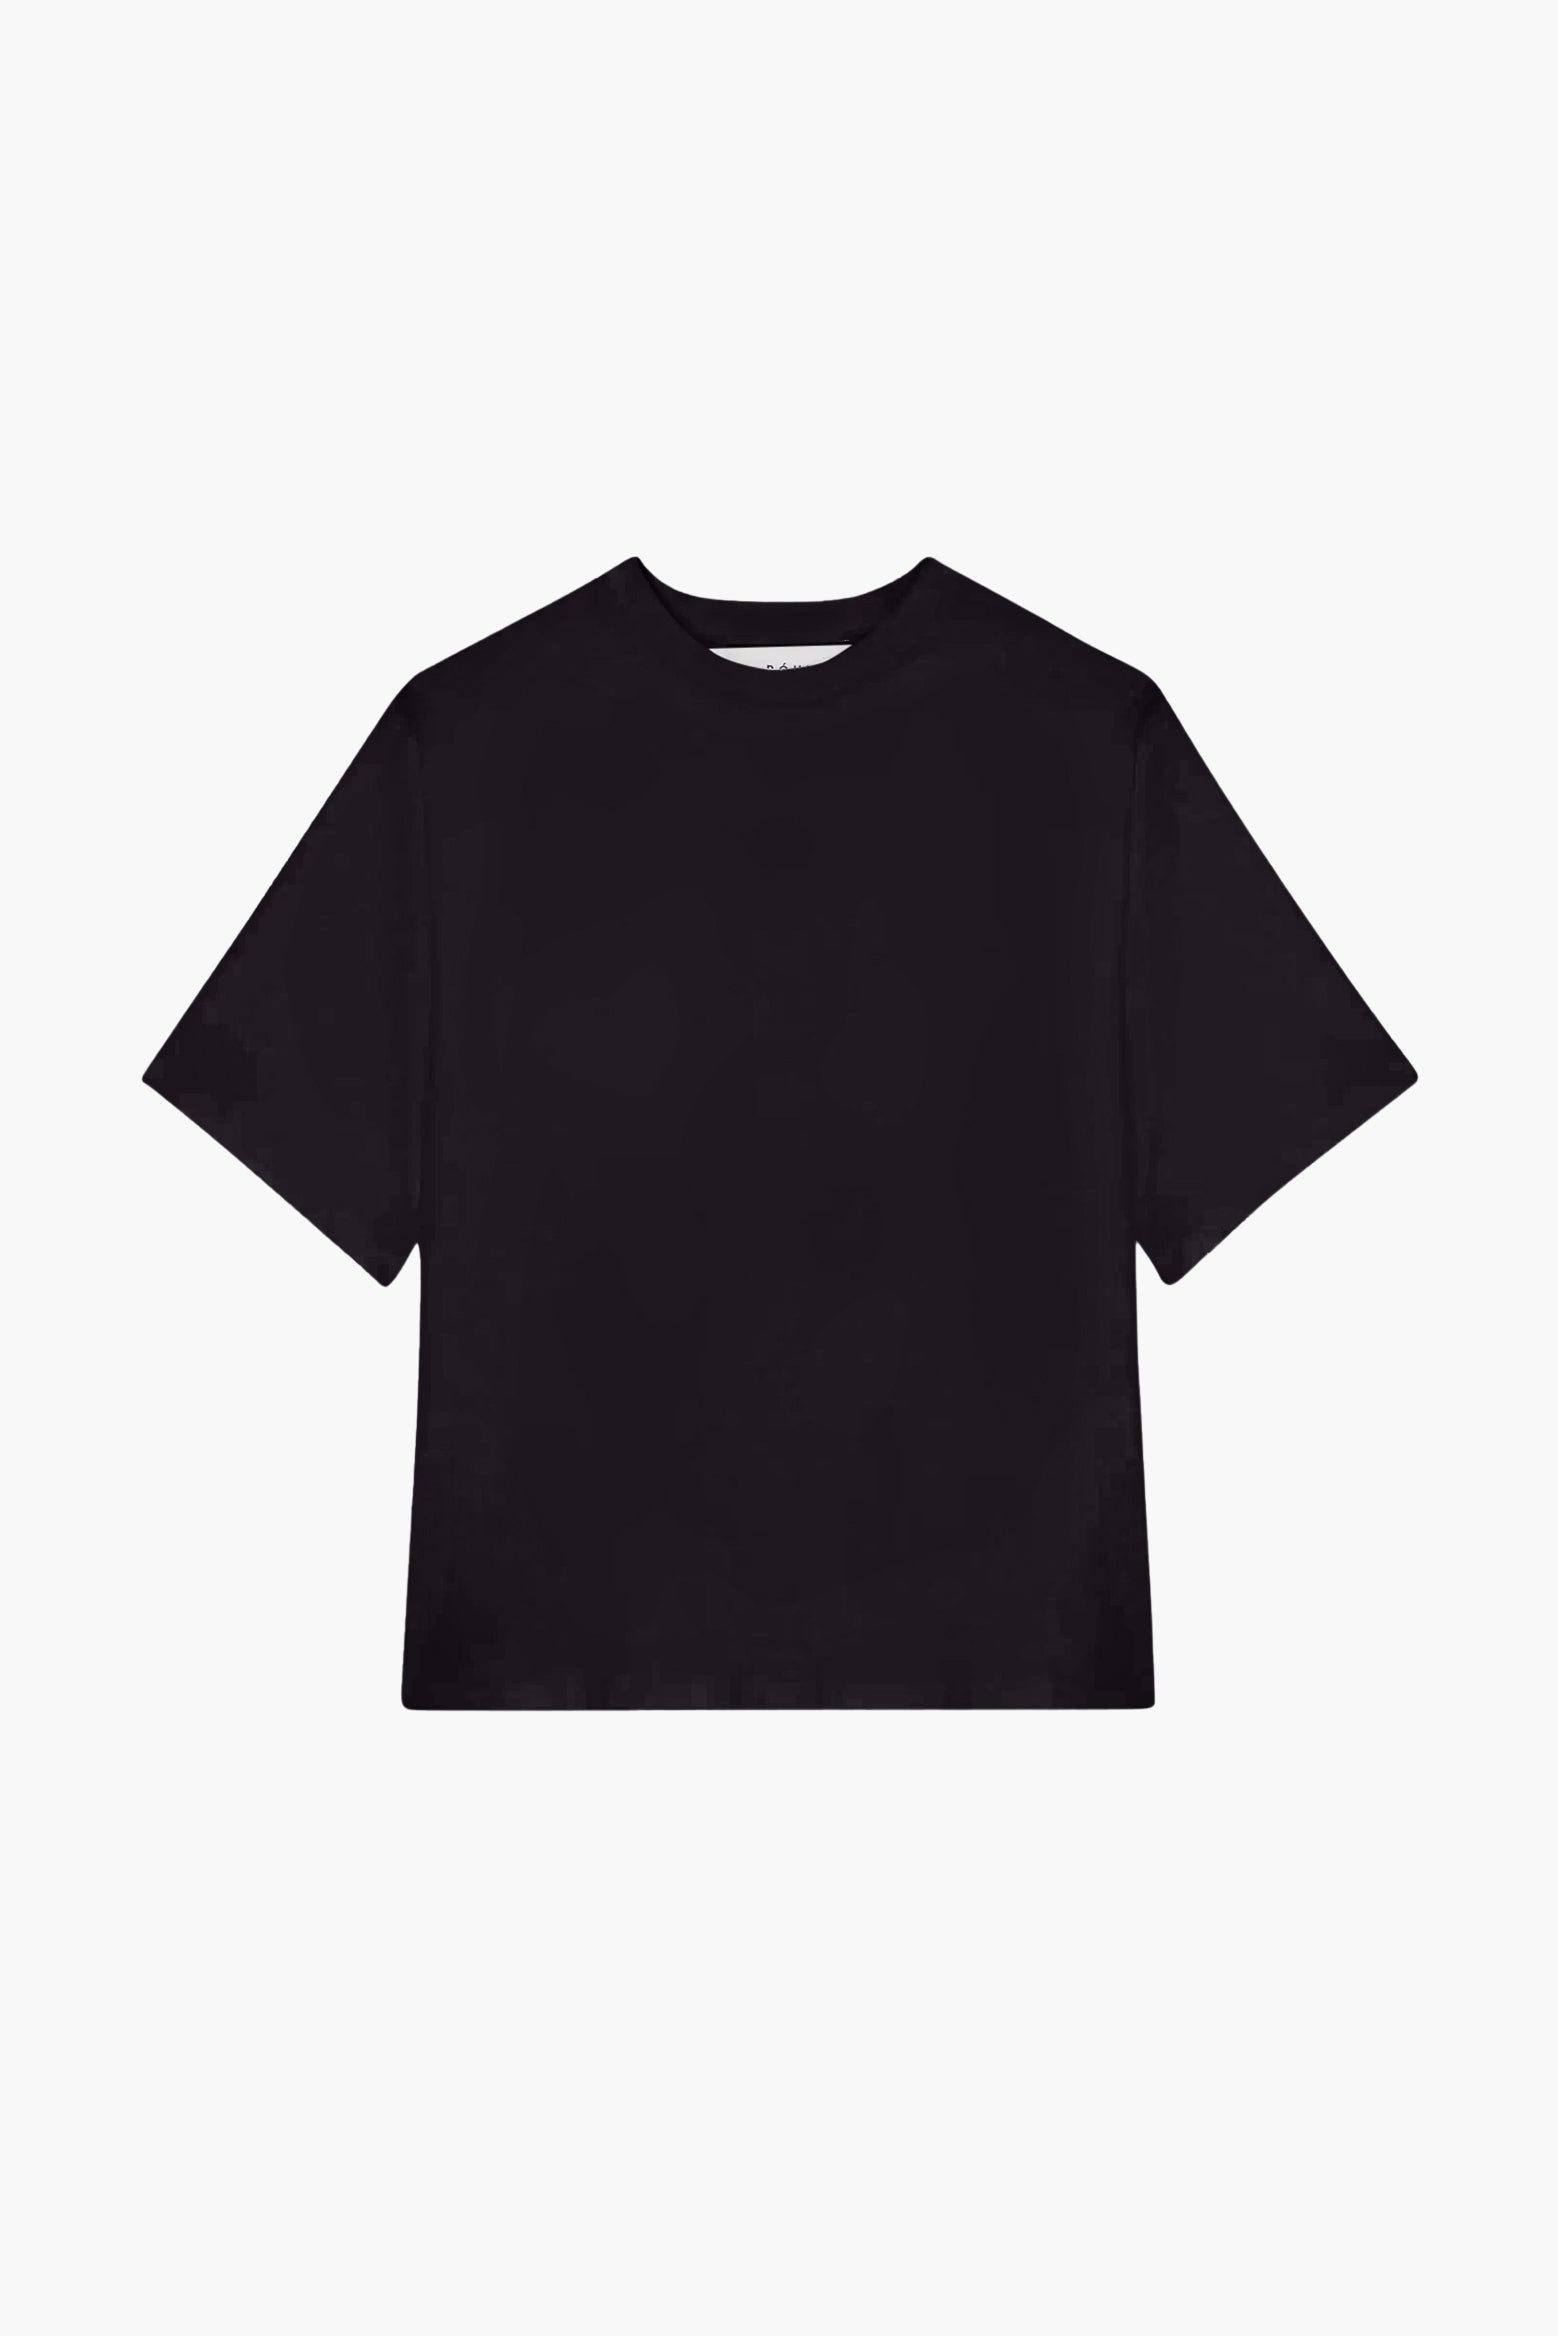 The Rohe Classic T Shirt in Noir available at The New Trend Australia